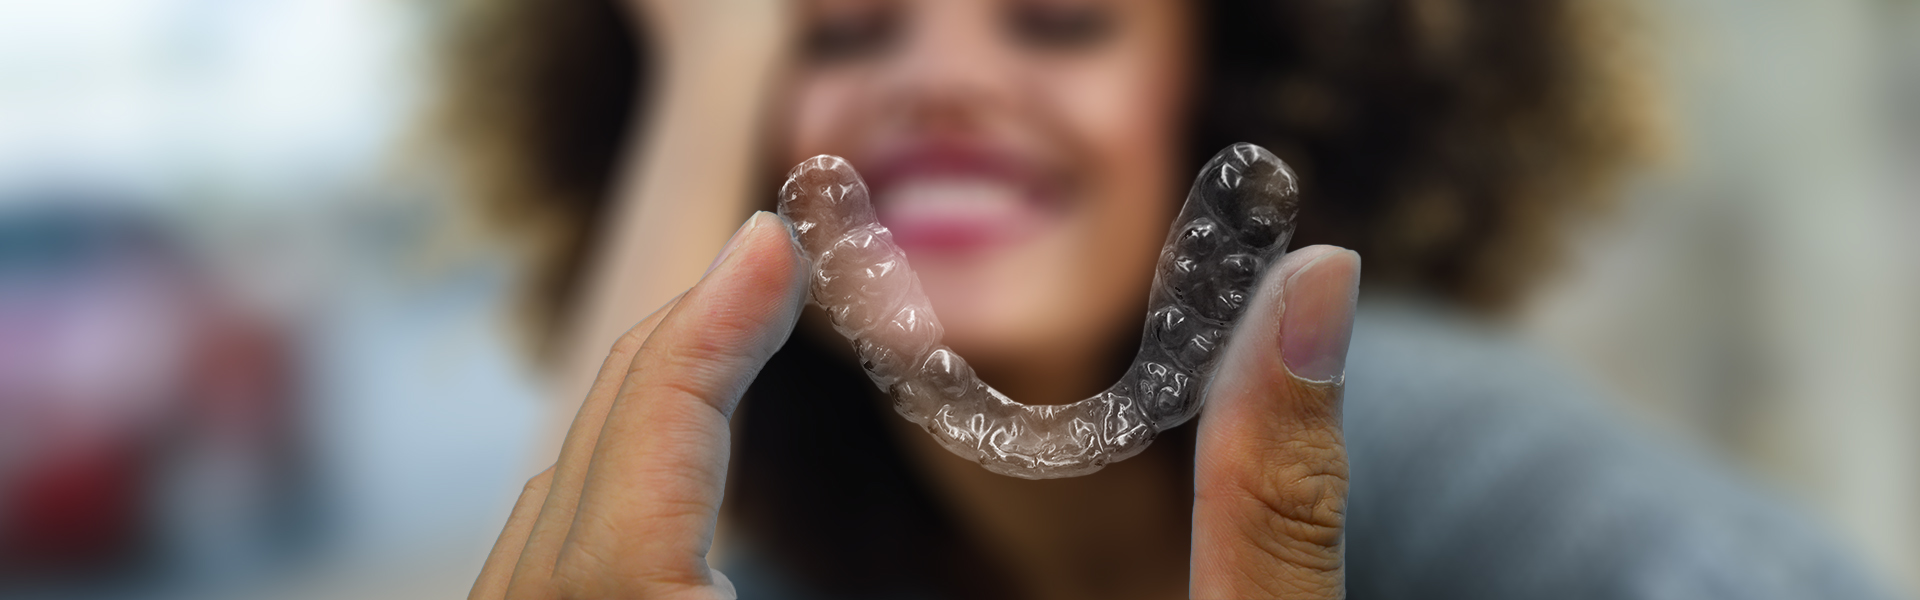 Tips for Taking Care of Your Invisalign Trays